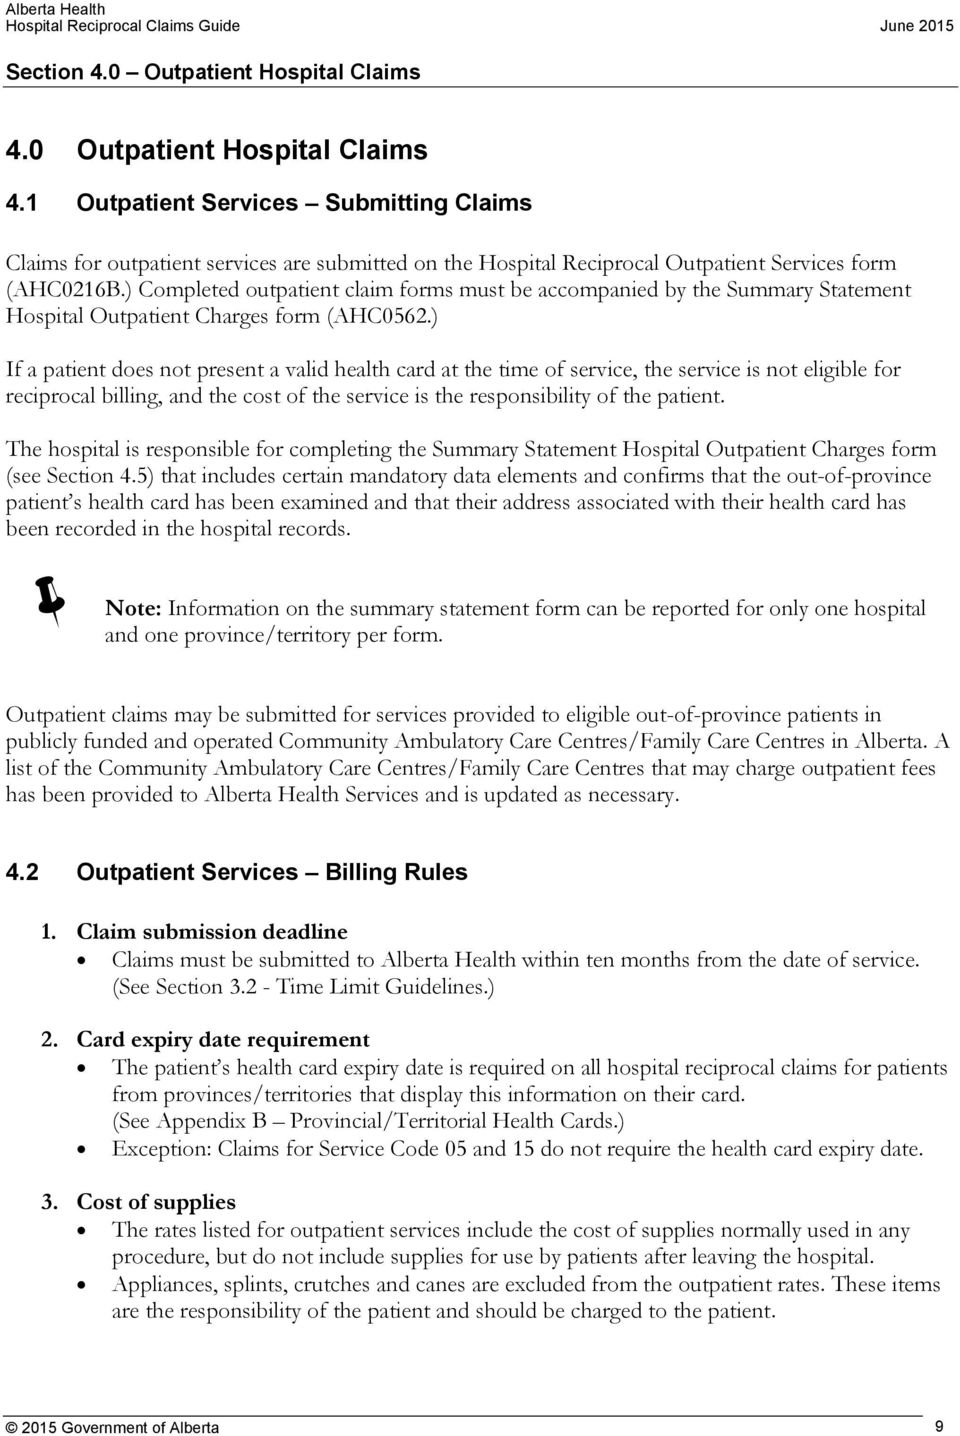 ) If a patient does not present a valid health card at the time of service, the service is not eligible for reciprocal billing, and the cost of the service is the responsibility of the patient.